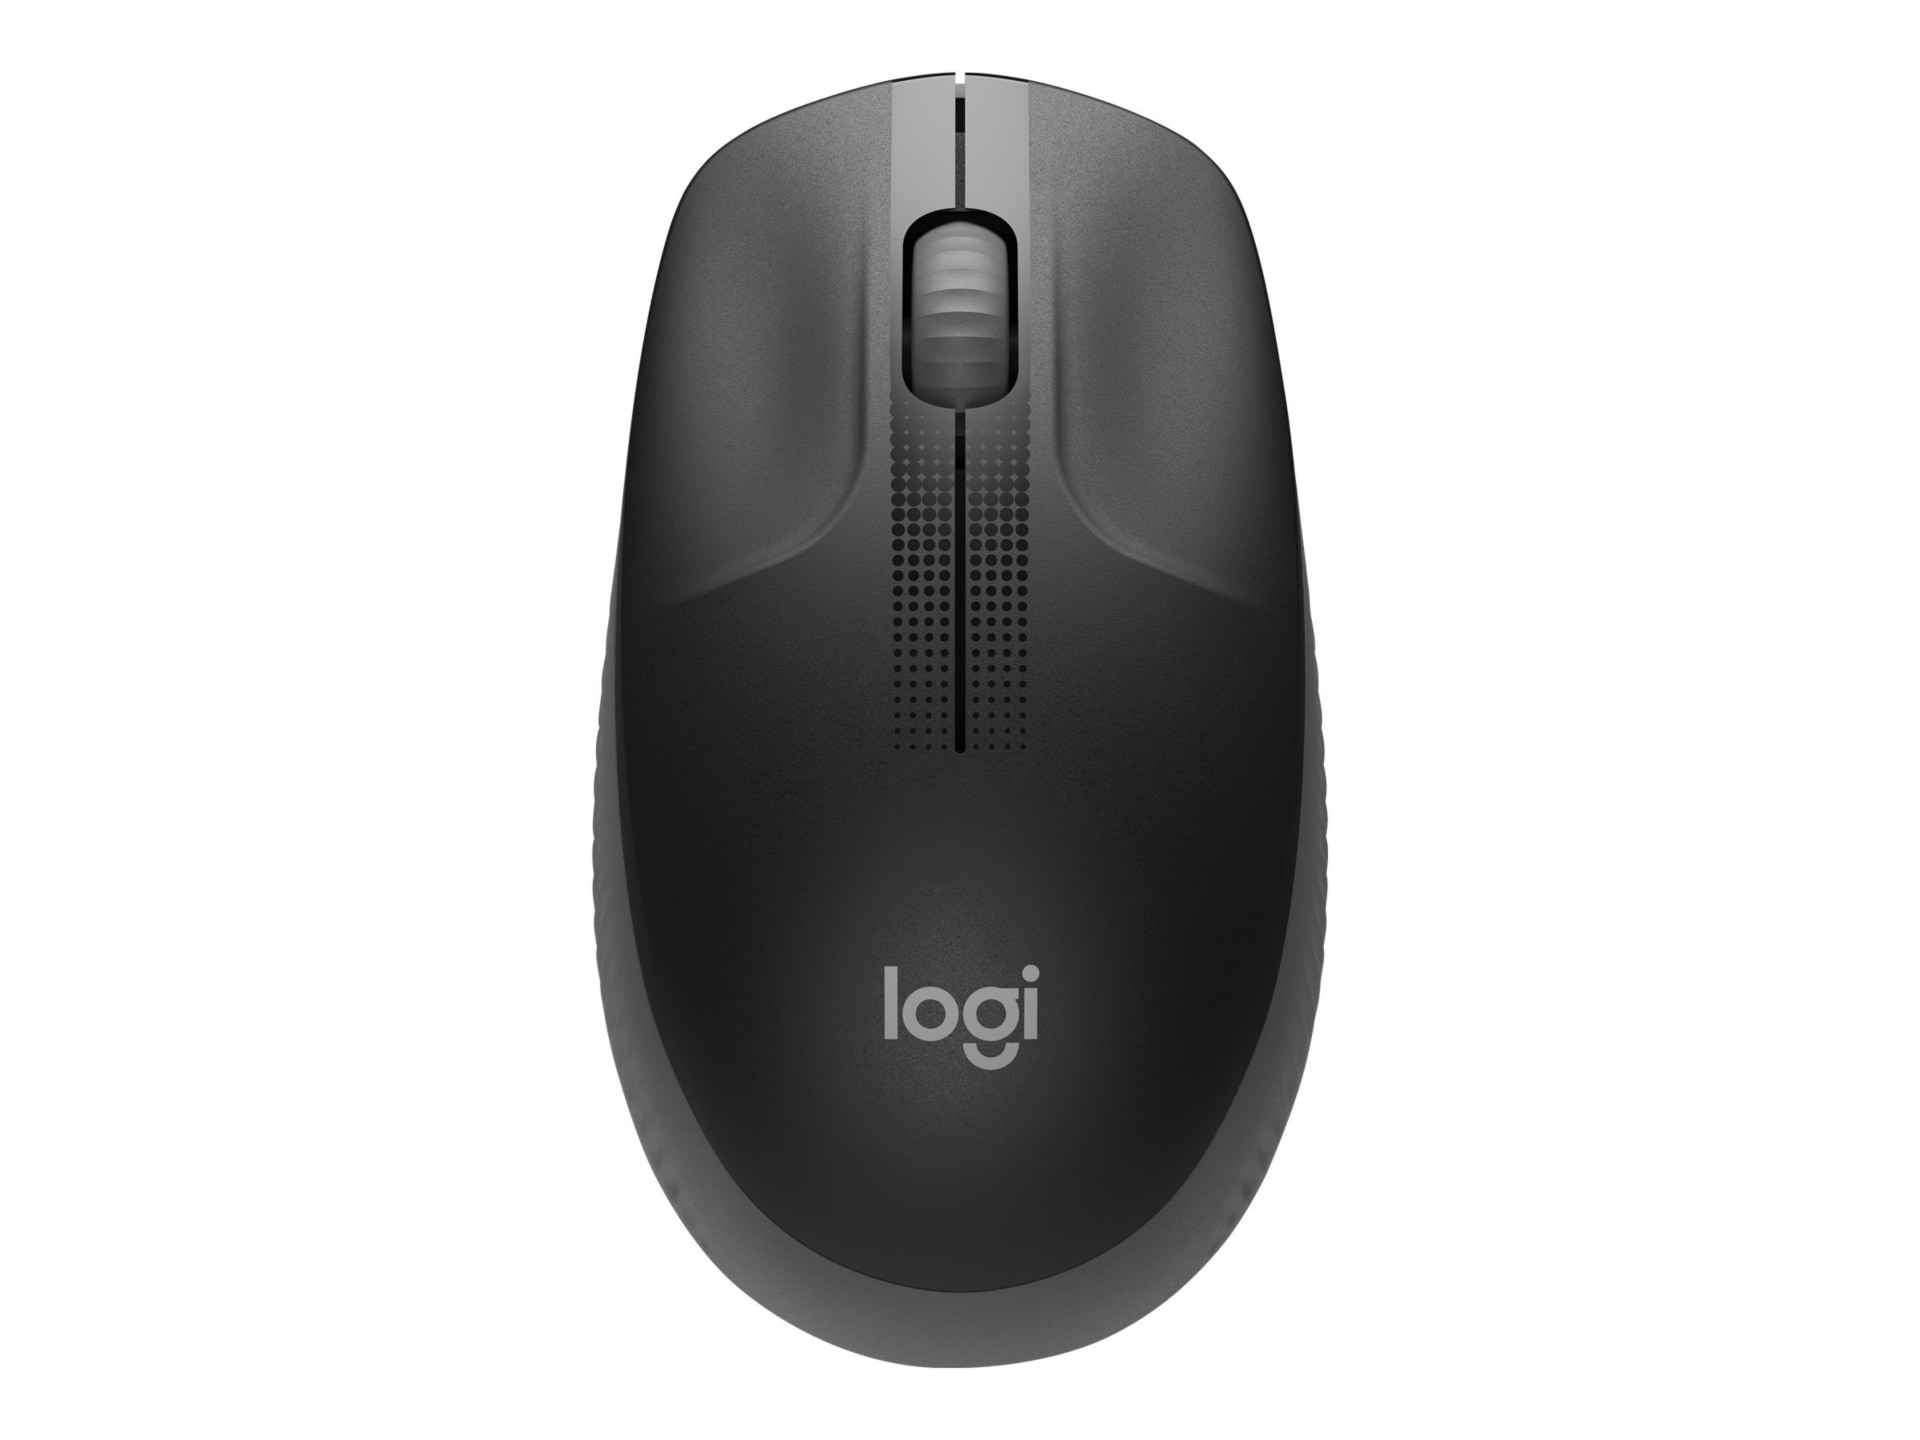 New Logitech M190 Wireless Mouse Brings Full-Size and Long-Lasting Comfort  from The World Leader in Mice and Keyboards at an Affordable Price – ASBIS